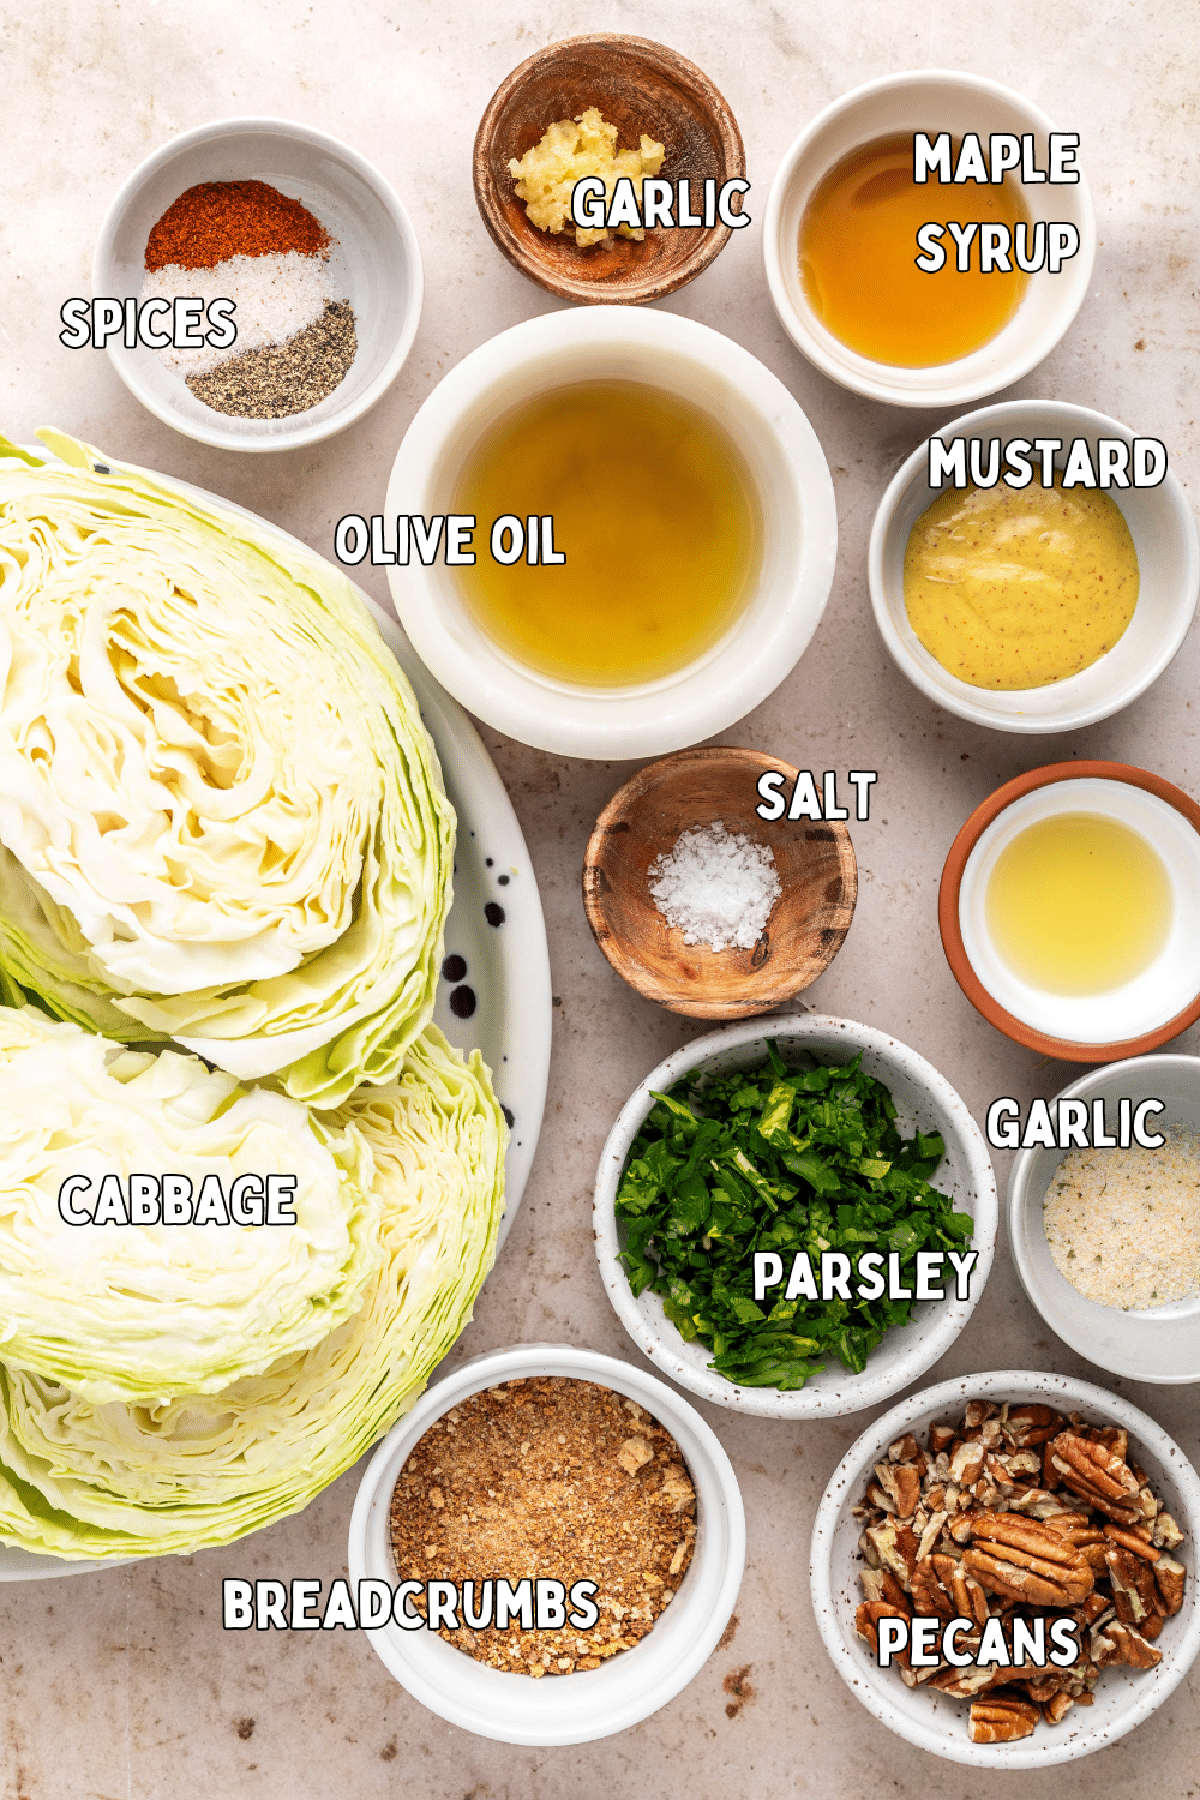 Overhead view of ingredients for cabbage steaks: cabbage, spices, olive oil, garlic, maple syrup, mustard, parsley, breadcrumbs, pecans.